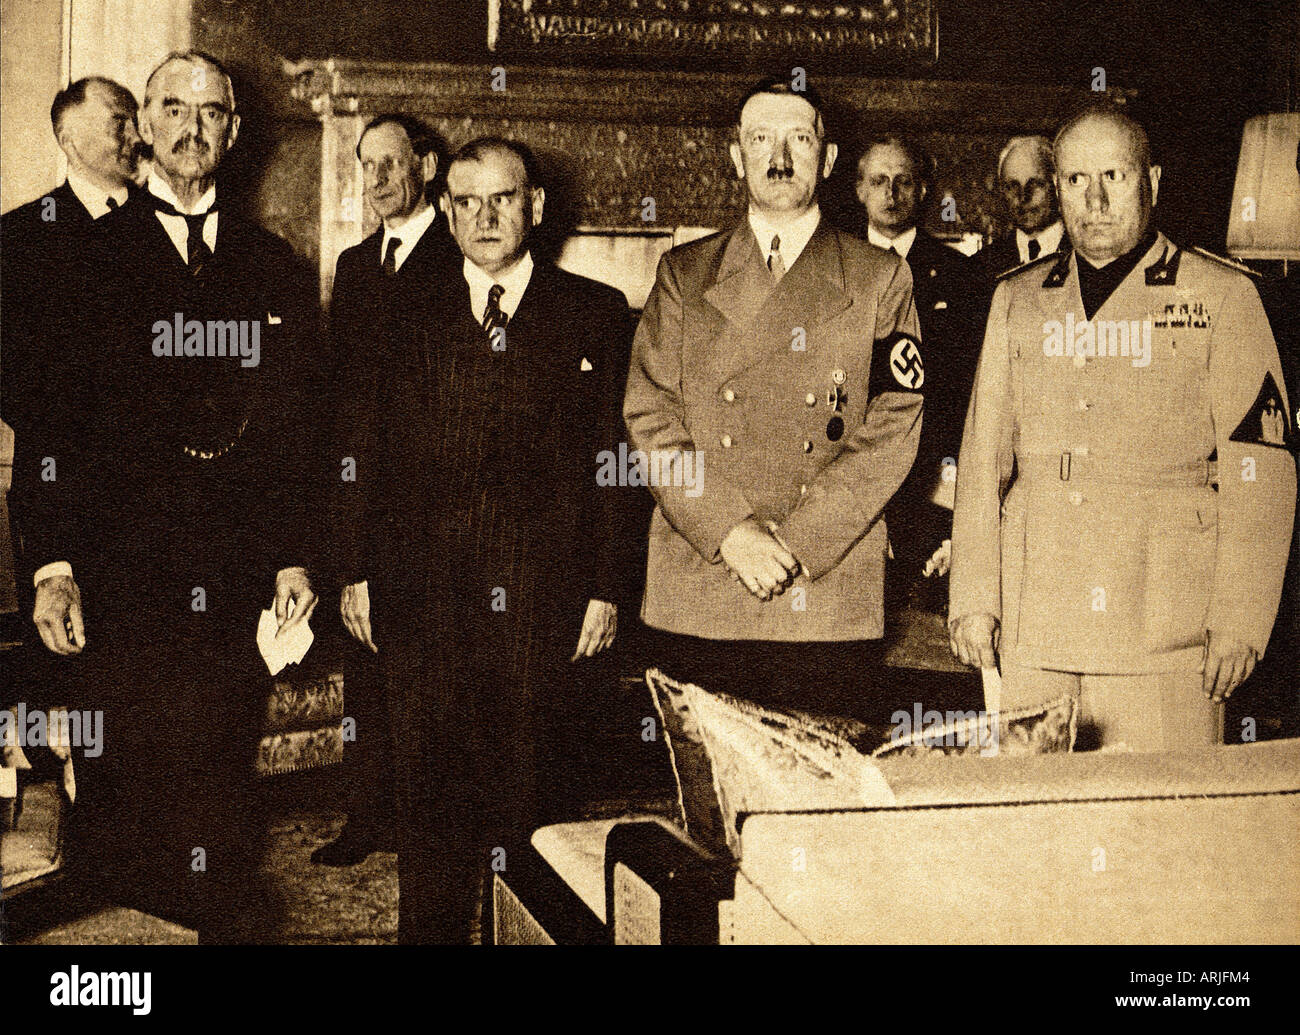 NEVILLE CHAMBERLAIN with Hitler 1939 - see description below Stock Photo